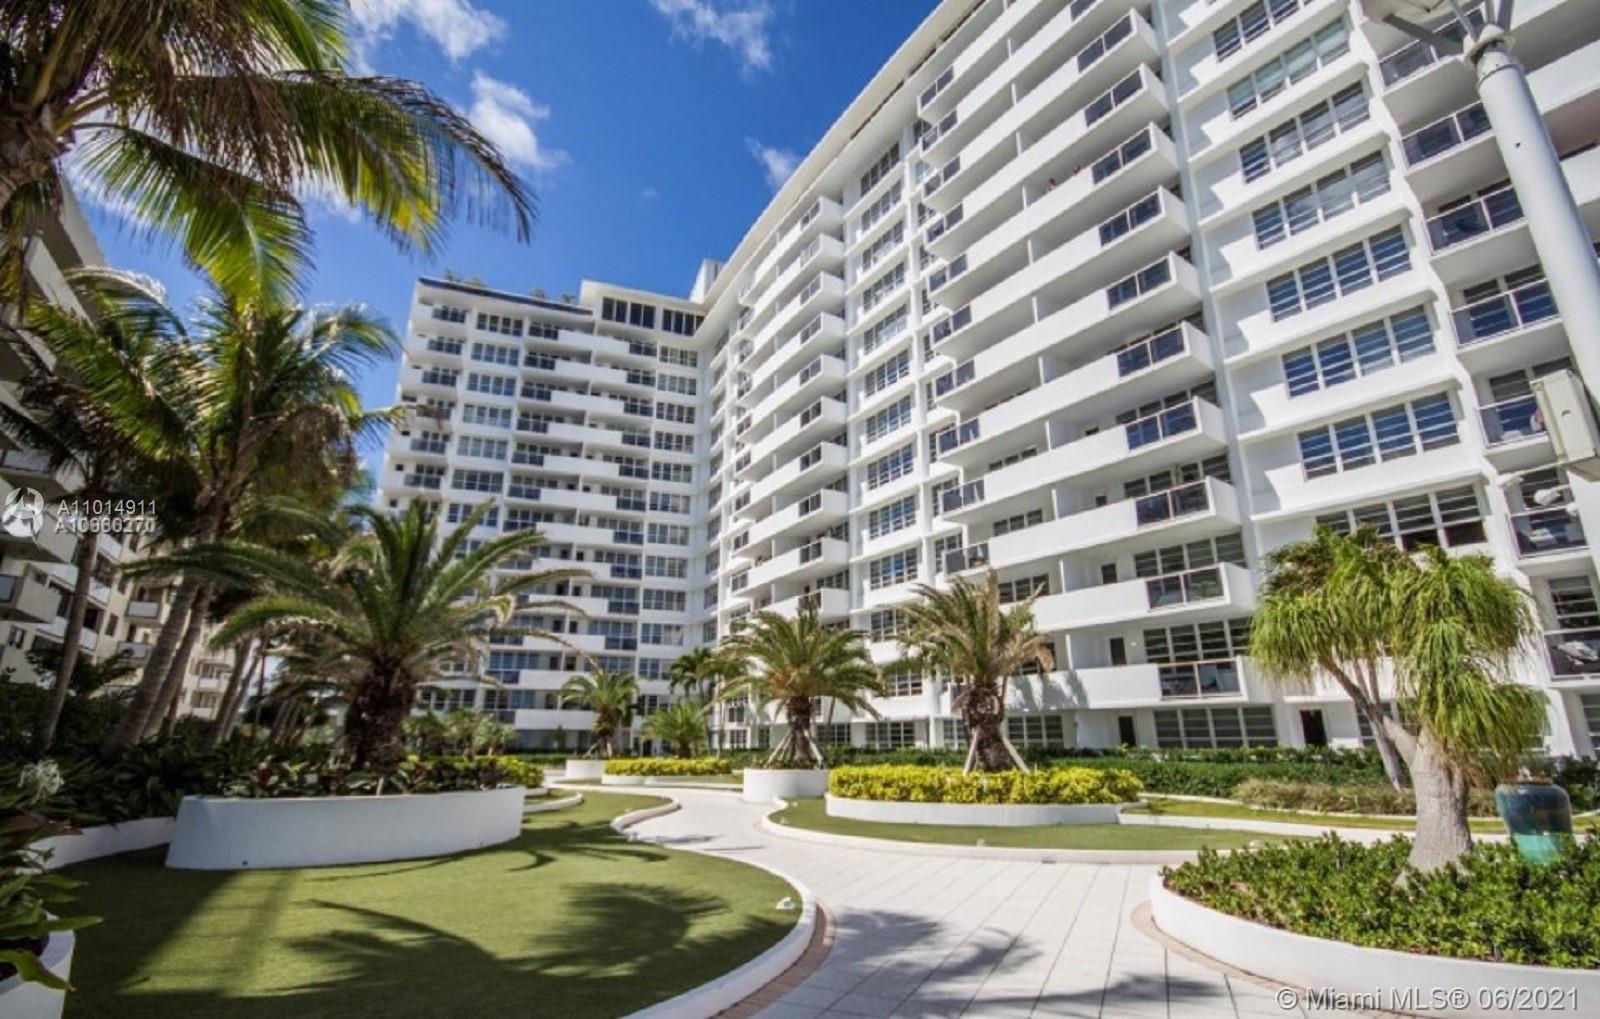 100  Lincoln Rd #1221 For Sale A11014911, FL